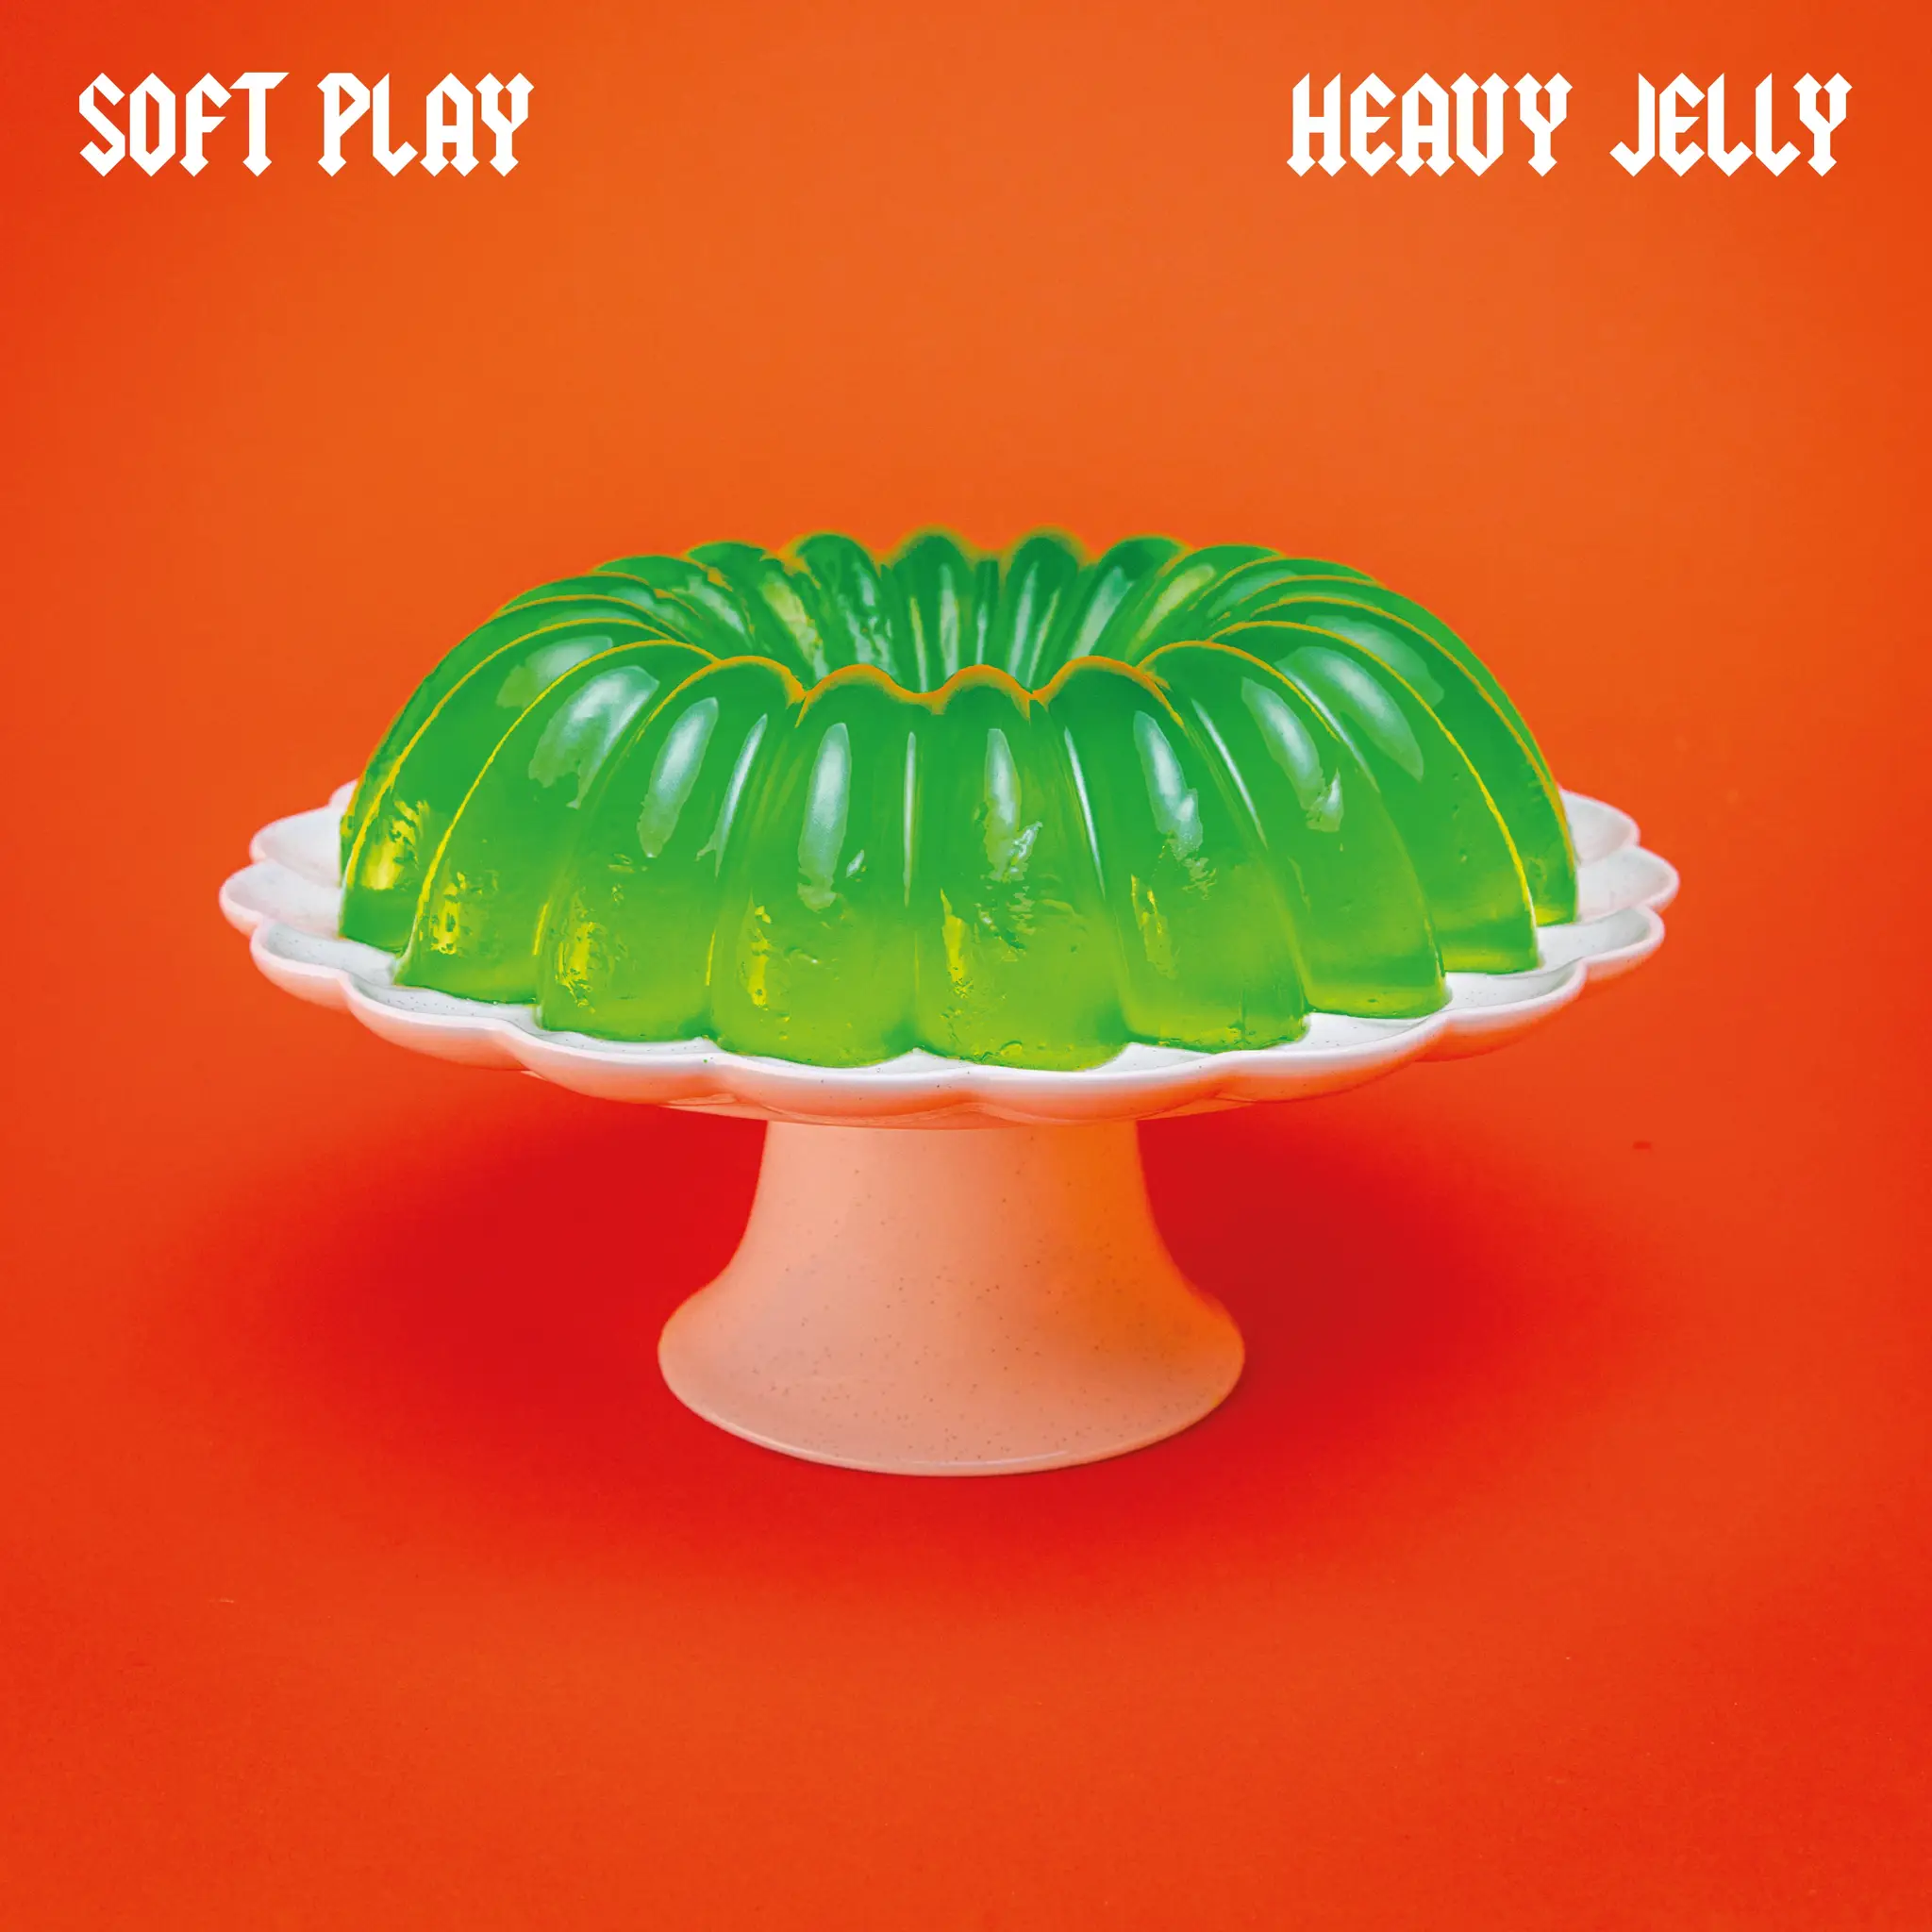 <strong>SOFT PLAY - Heavy Jelly</strong> (Vinyl LP - green)